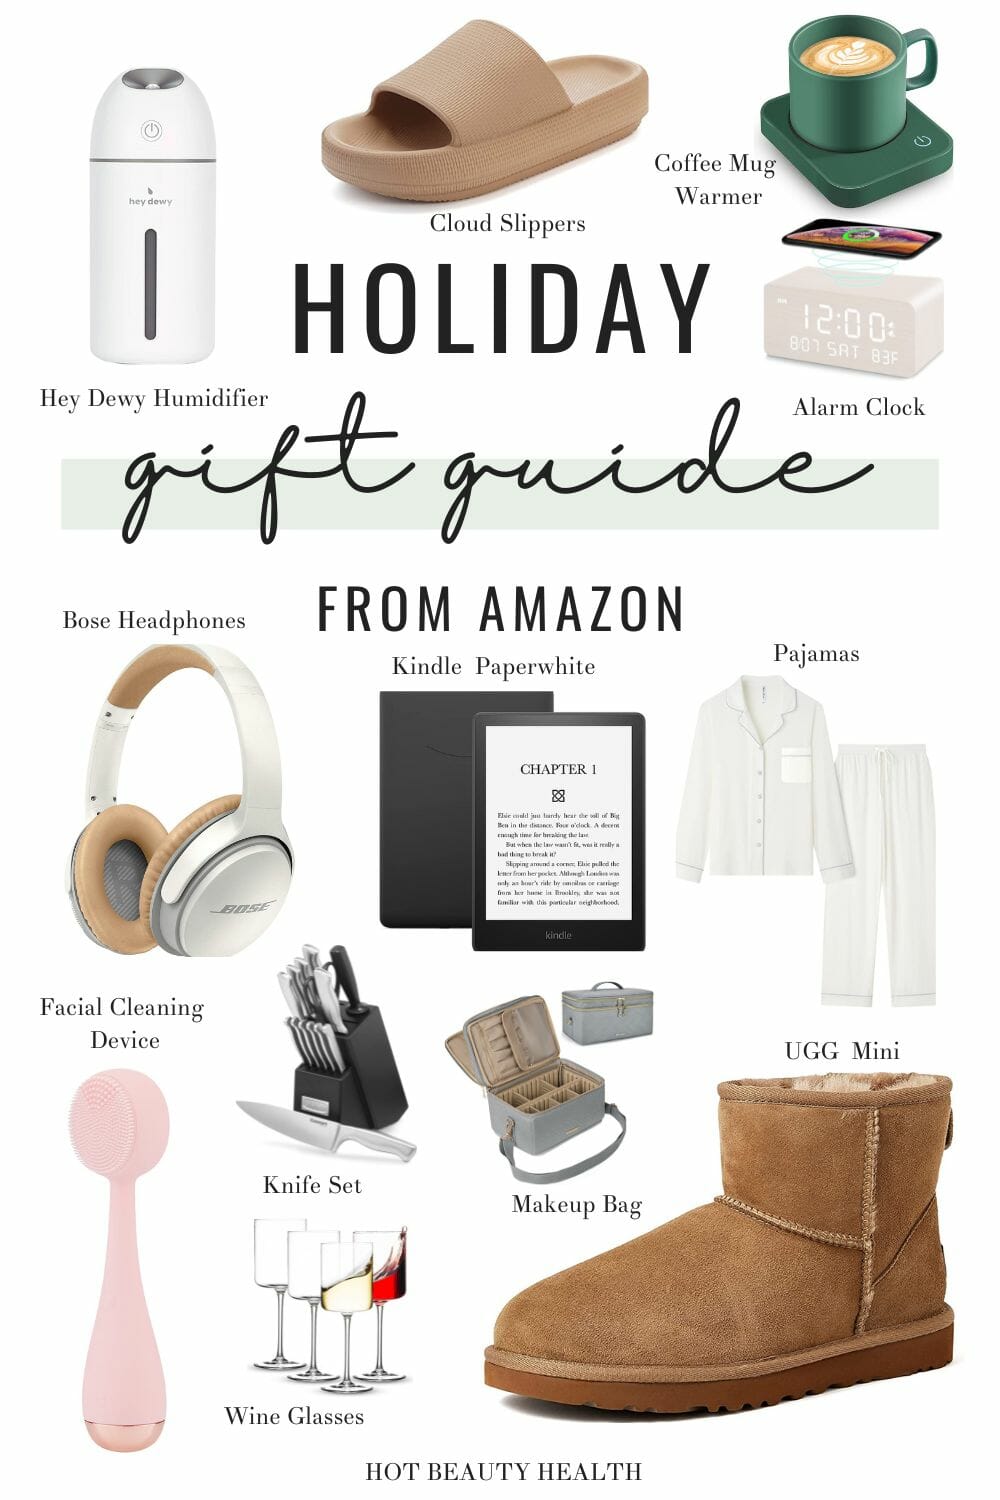 Holiday Gift Ideas From Amazon